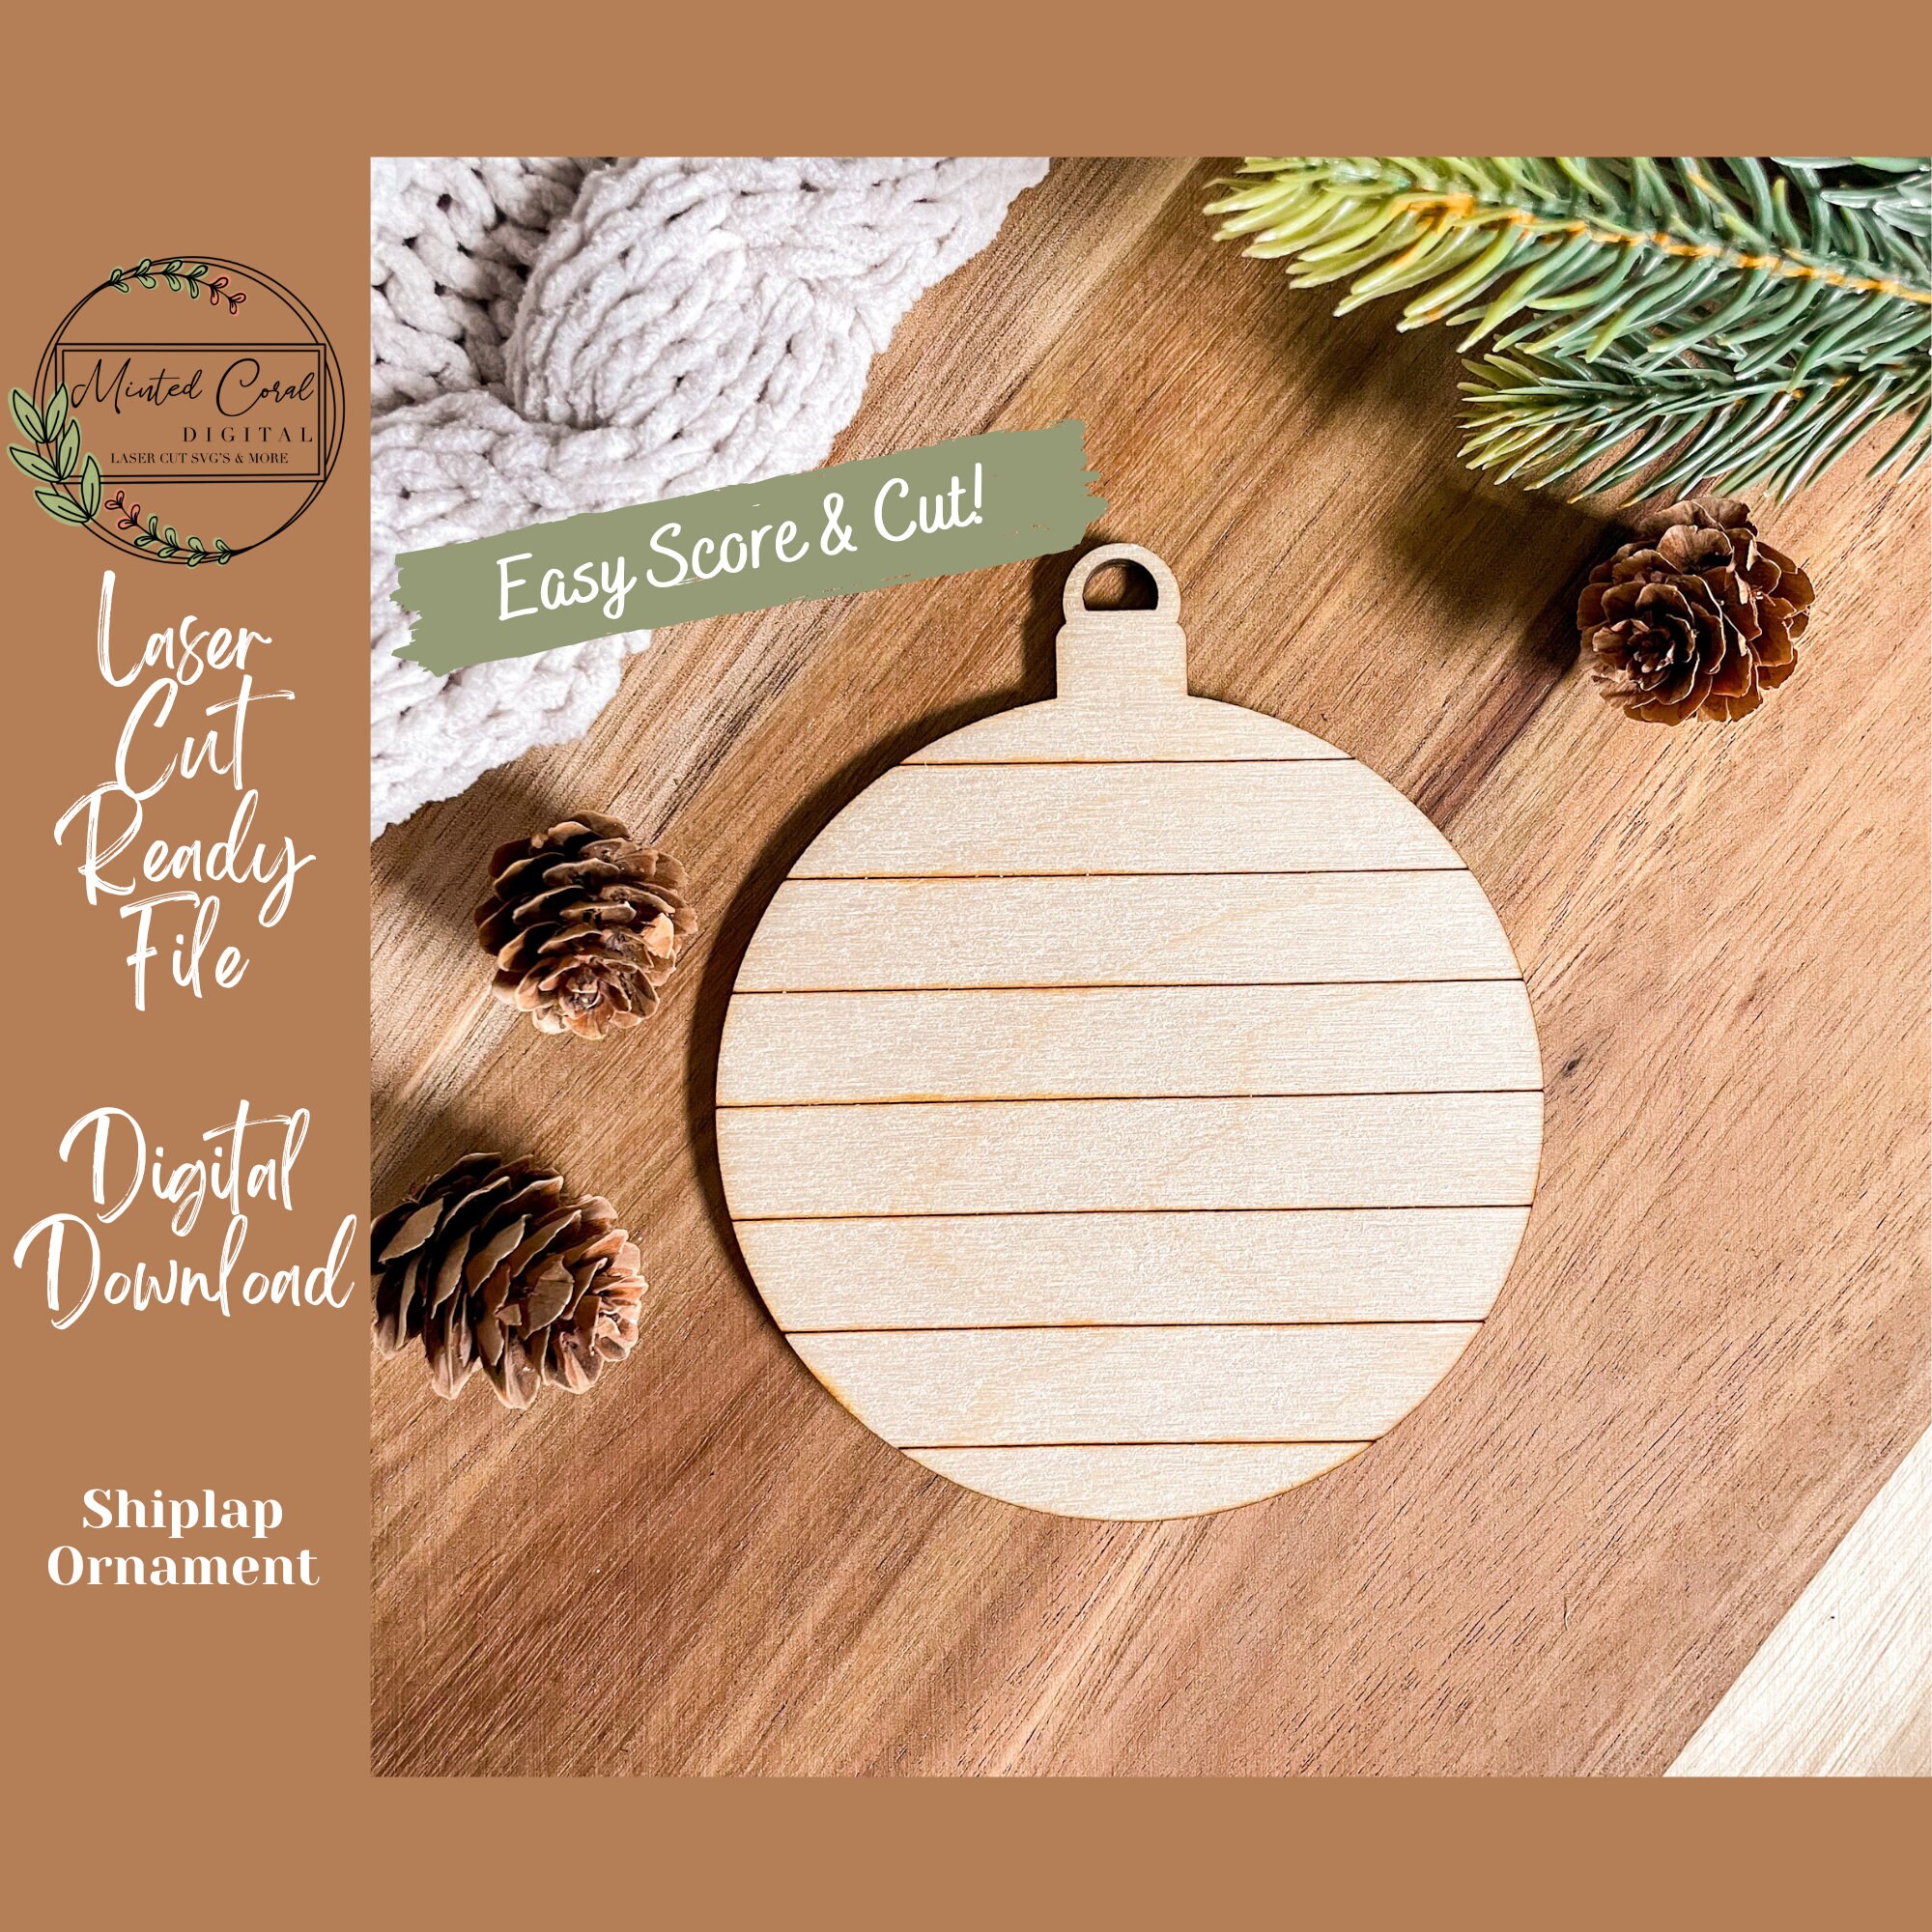 DIY Christmas Ornament Kits, Paintable, Stackable, Fun for Kids, Do It  Yourself, It's a Great Gift Made From Beautiful Reclaimed Wood 